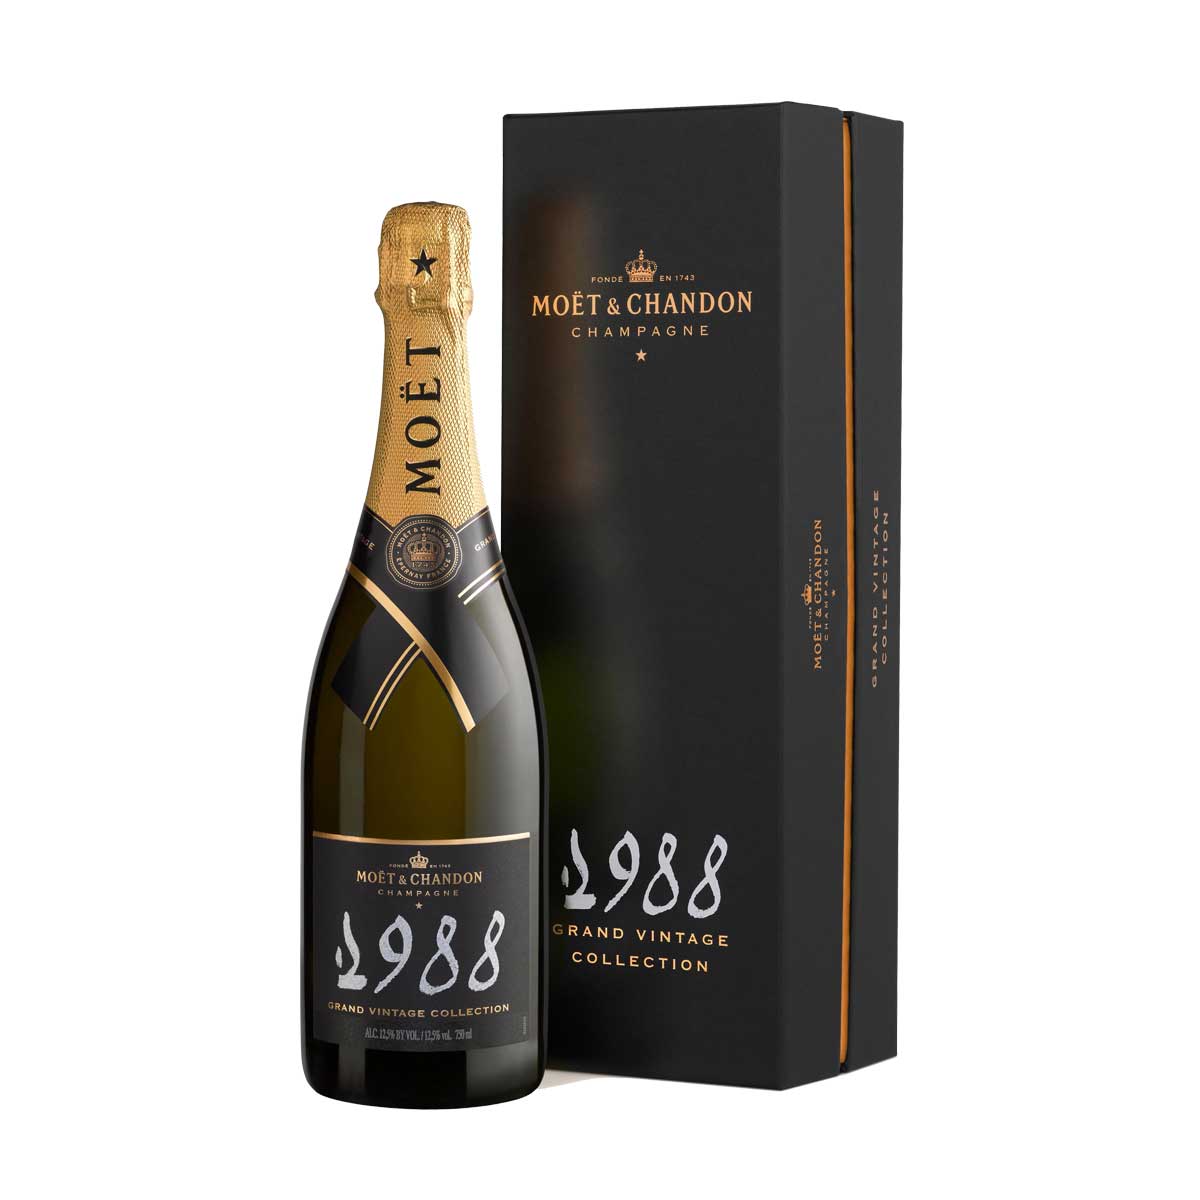 TAG Liquor Stores Delivery - Moet & Chandon Grand Vintage 1988 Champagne 750ml